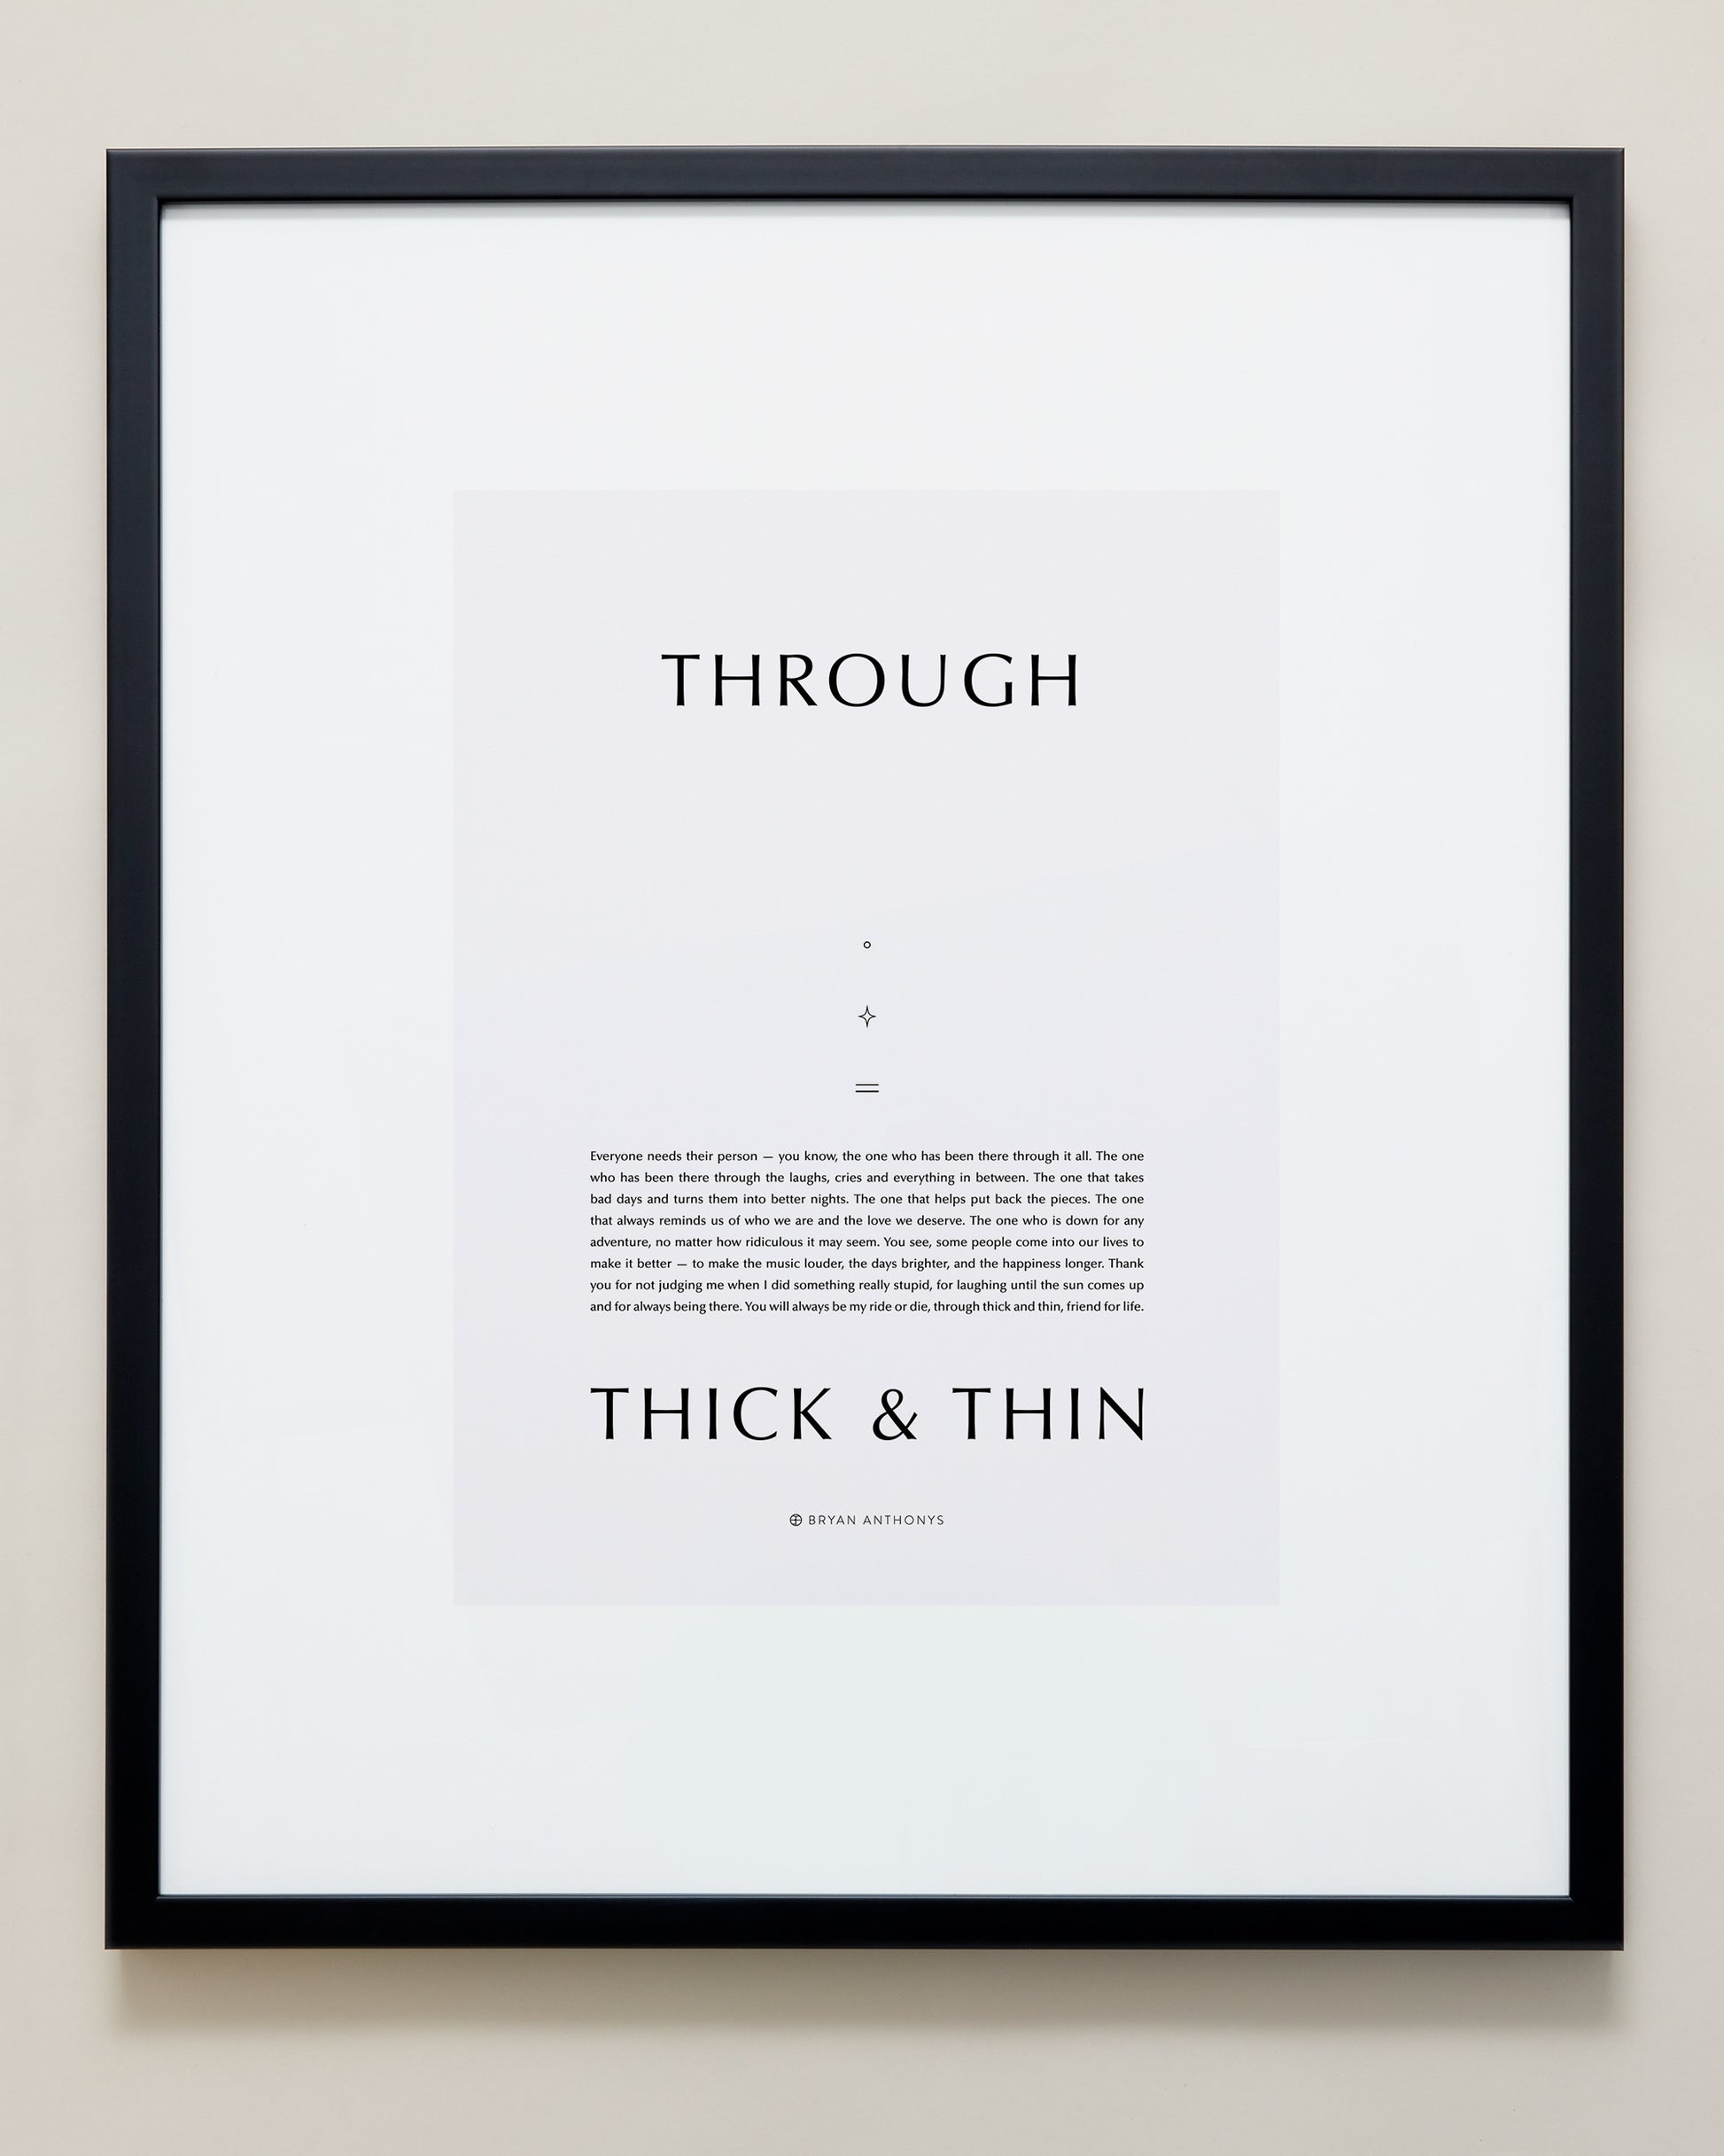 Bryan Anthonys Home Decor Through Thick and Thin Framed Print 20x24 Black with Gray